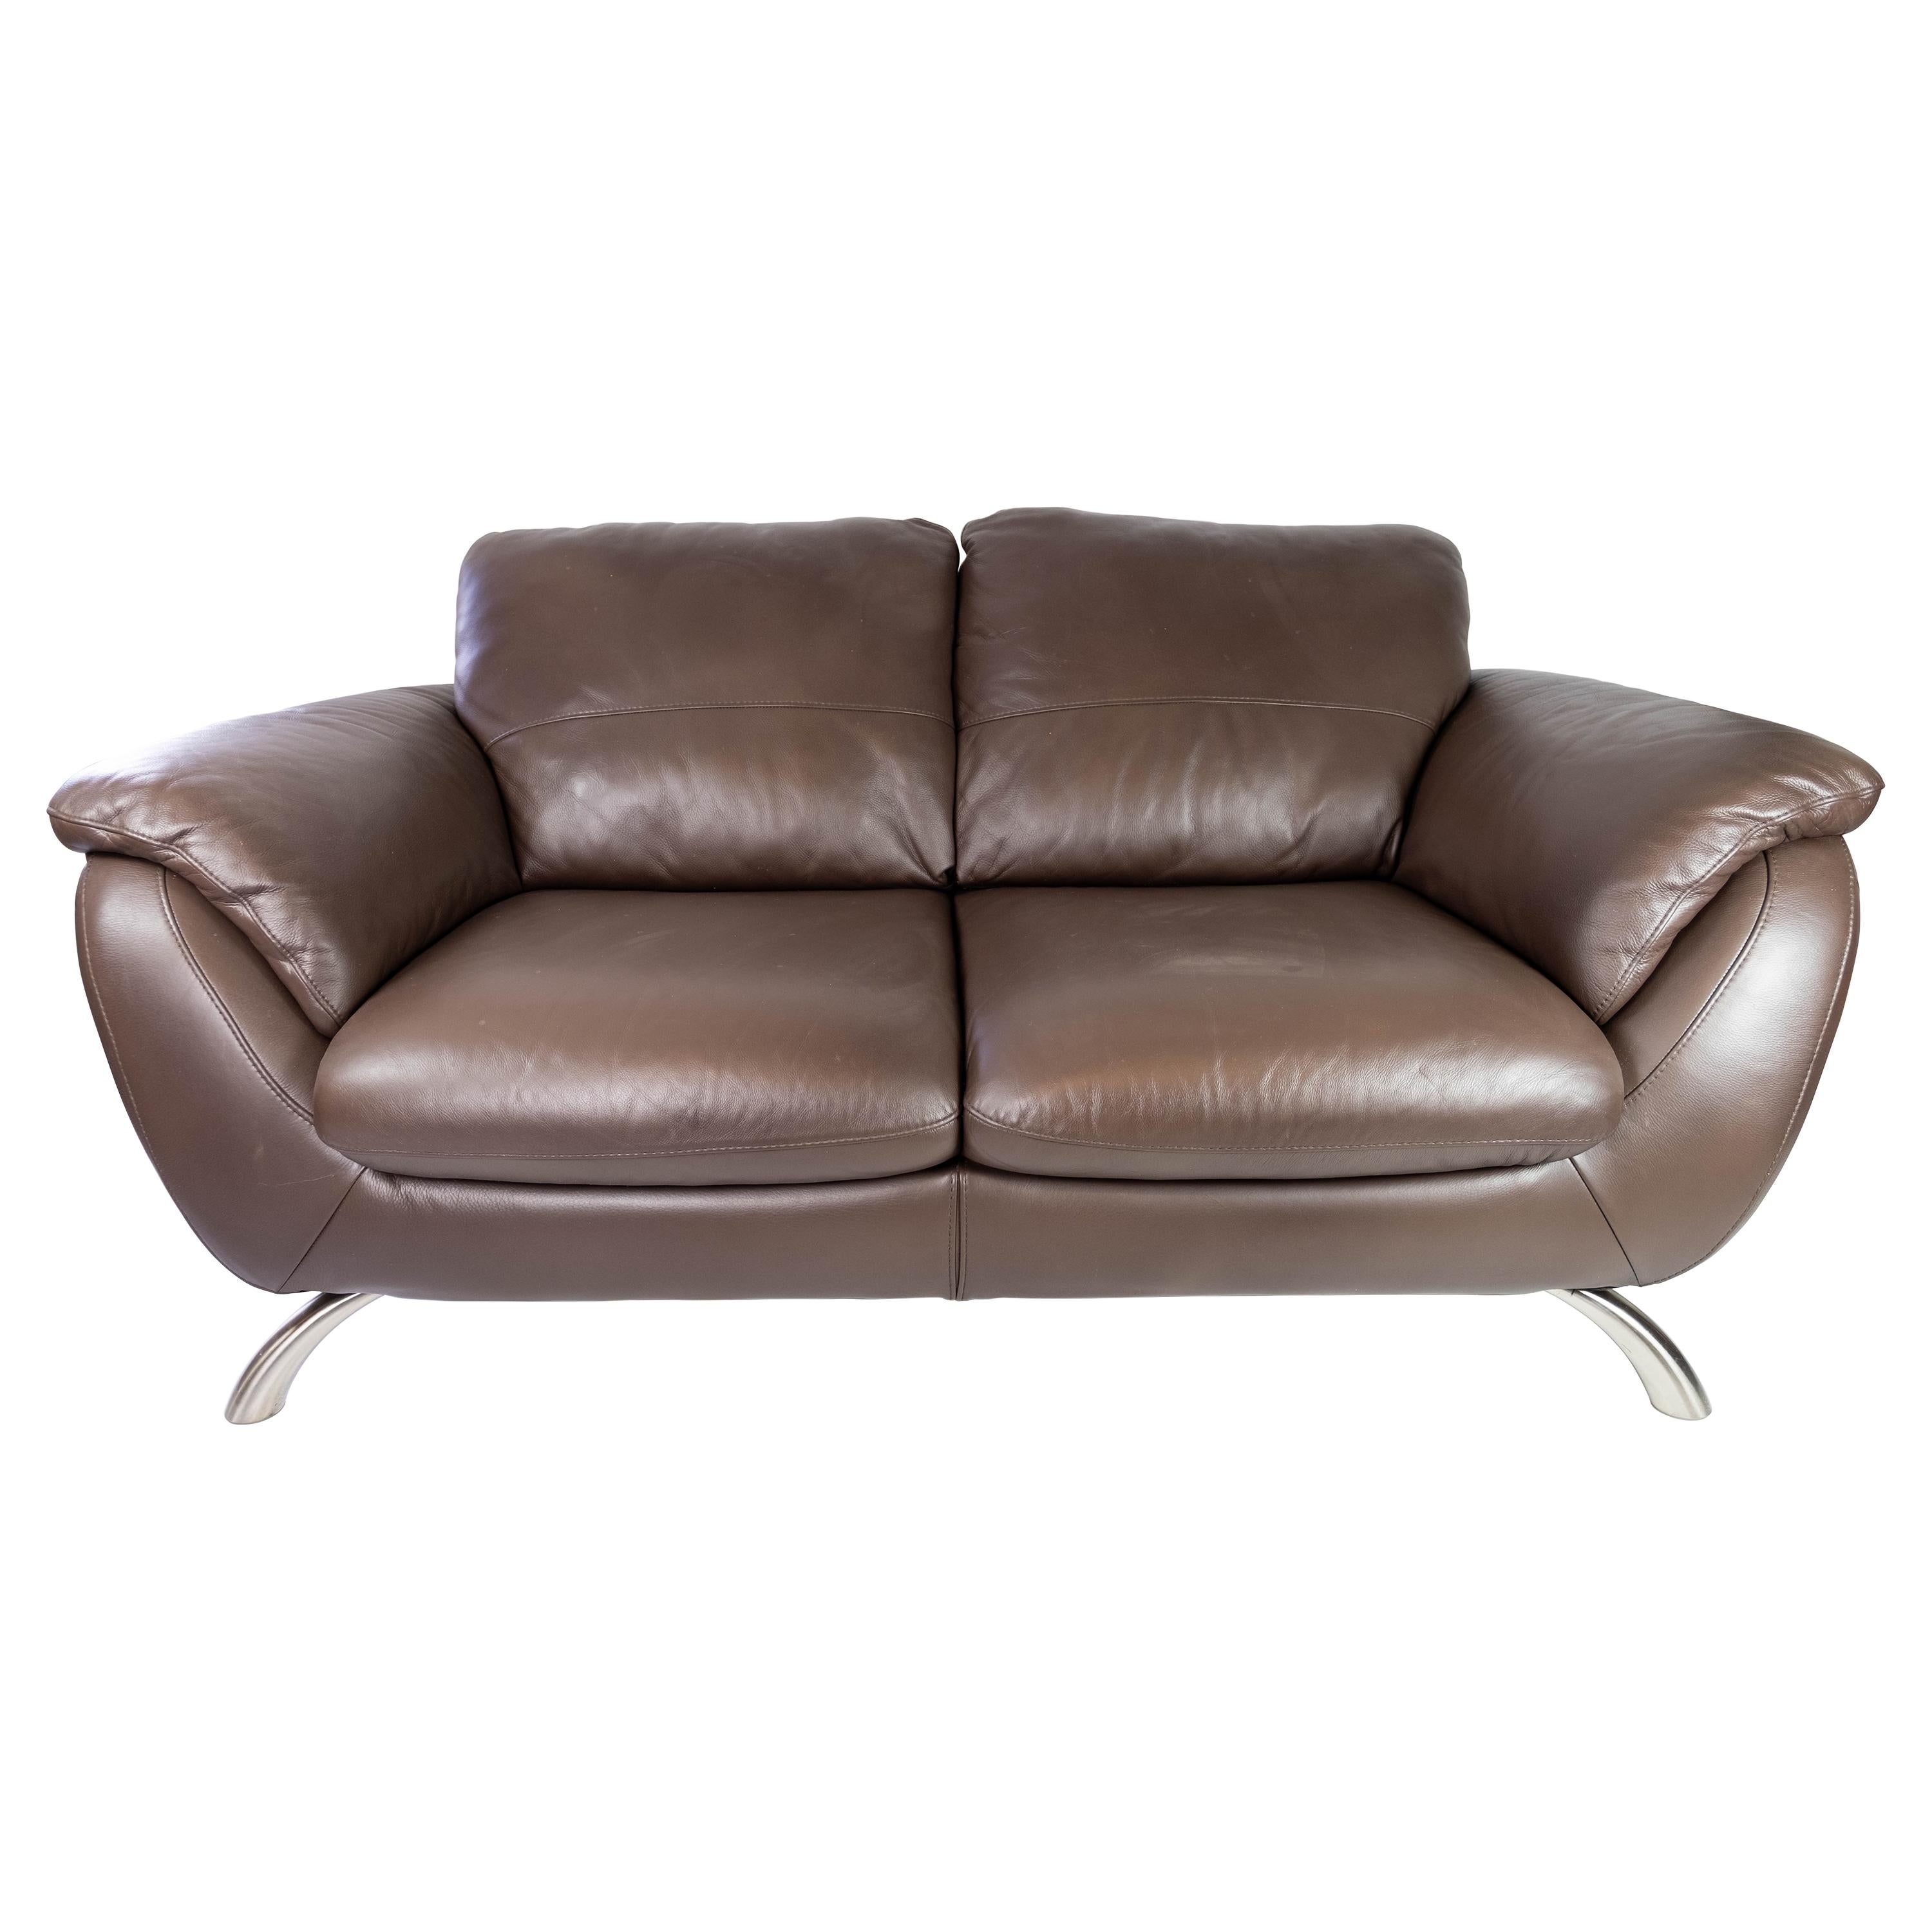 Two Seater Sofa Upholstered with Brown Leather and Frame of Metal, by Italsofa